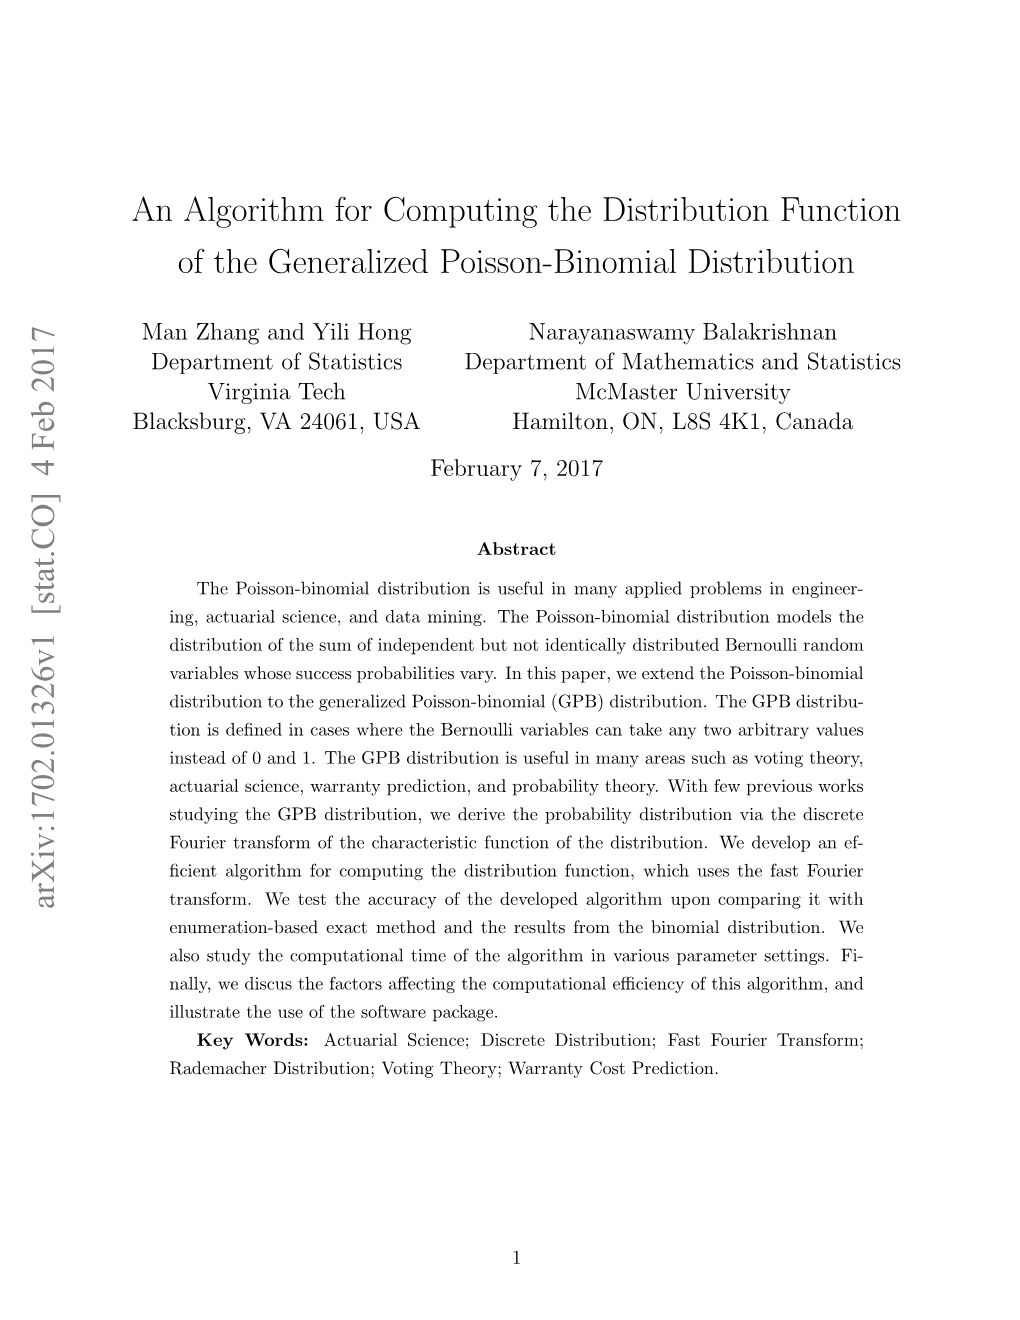 An Algorithm for Computing the Distribution Function of The